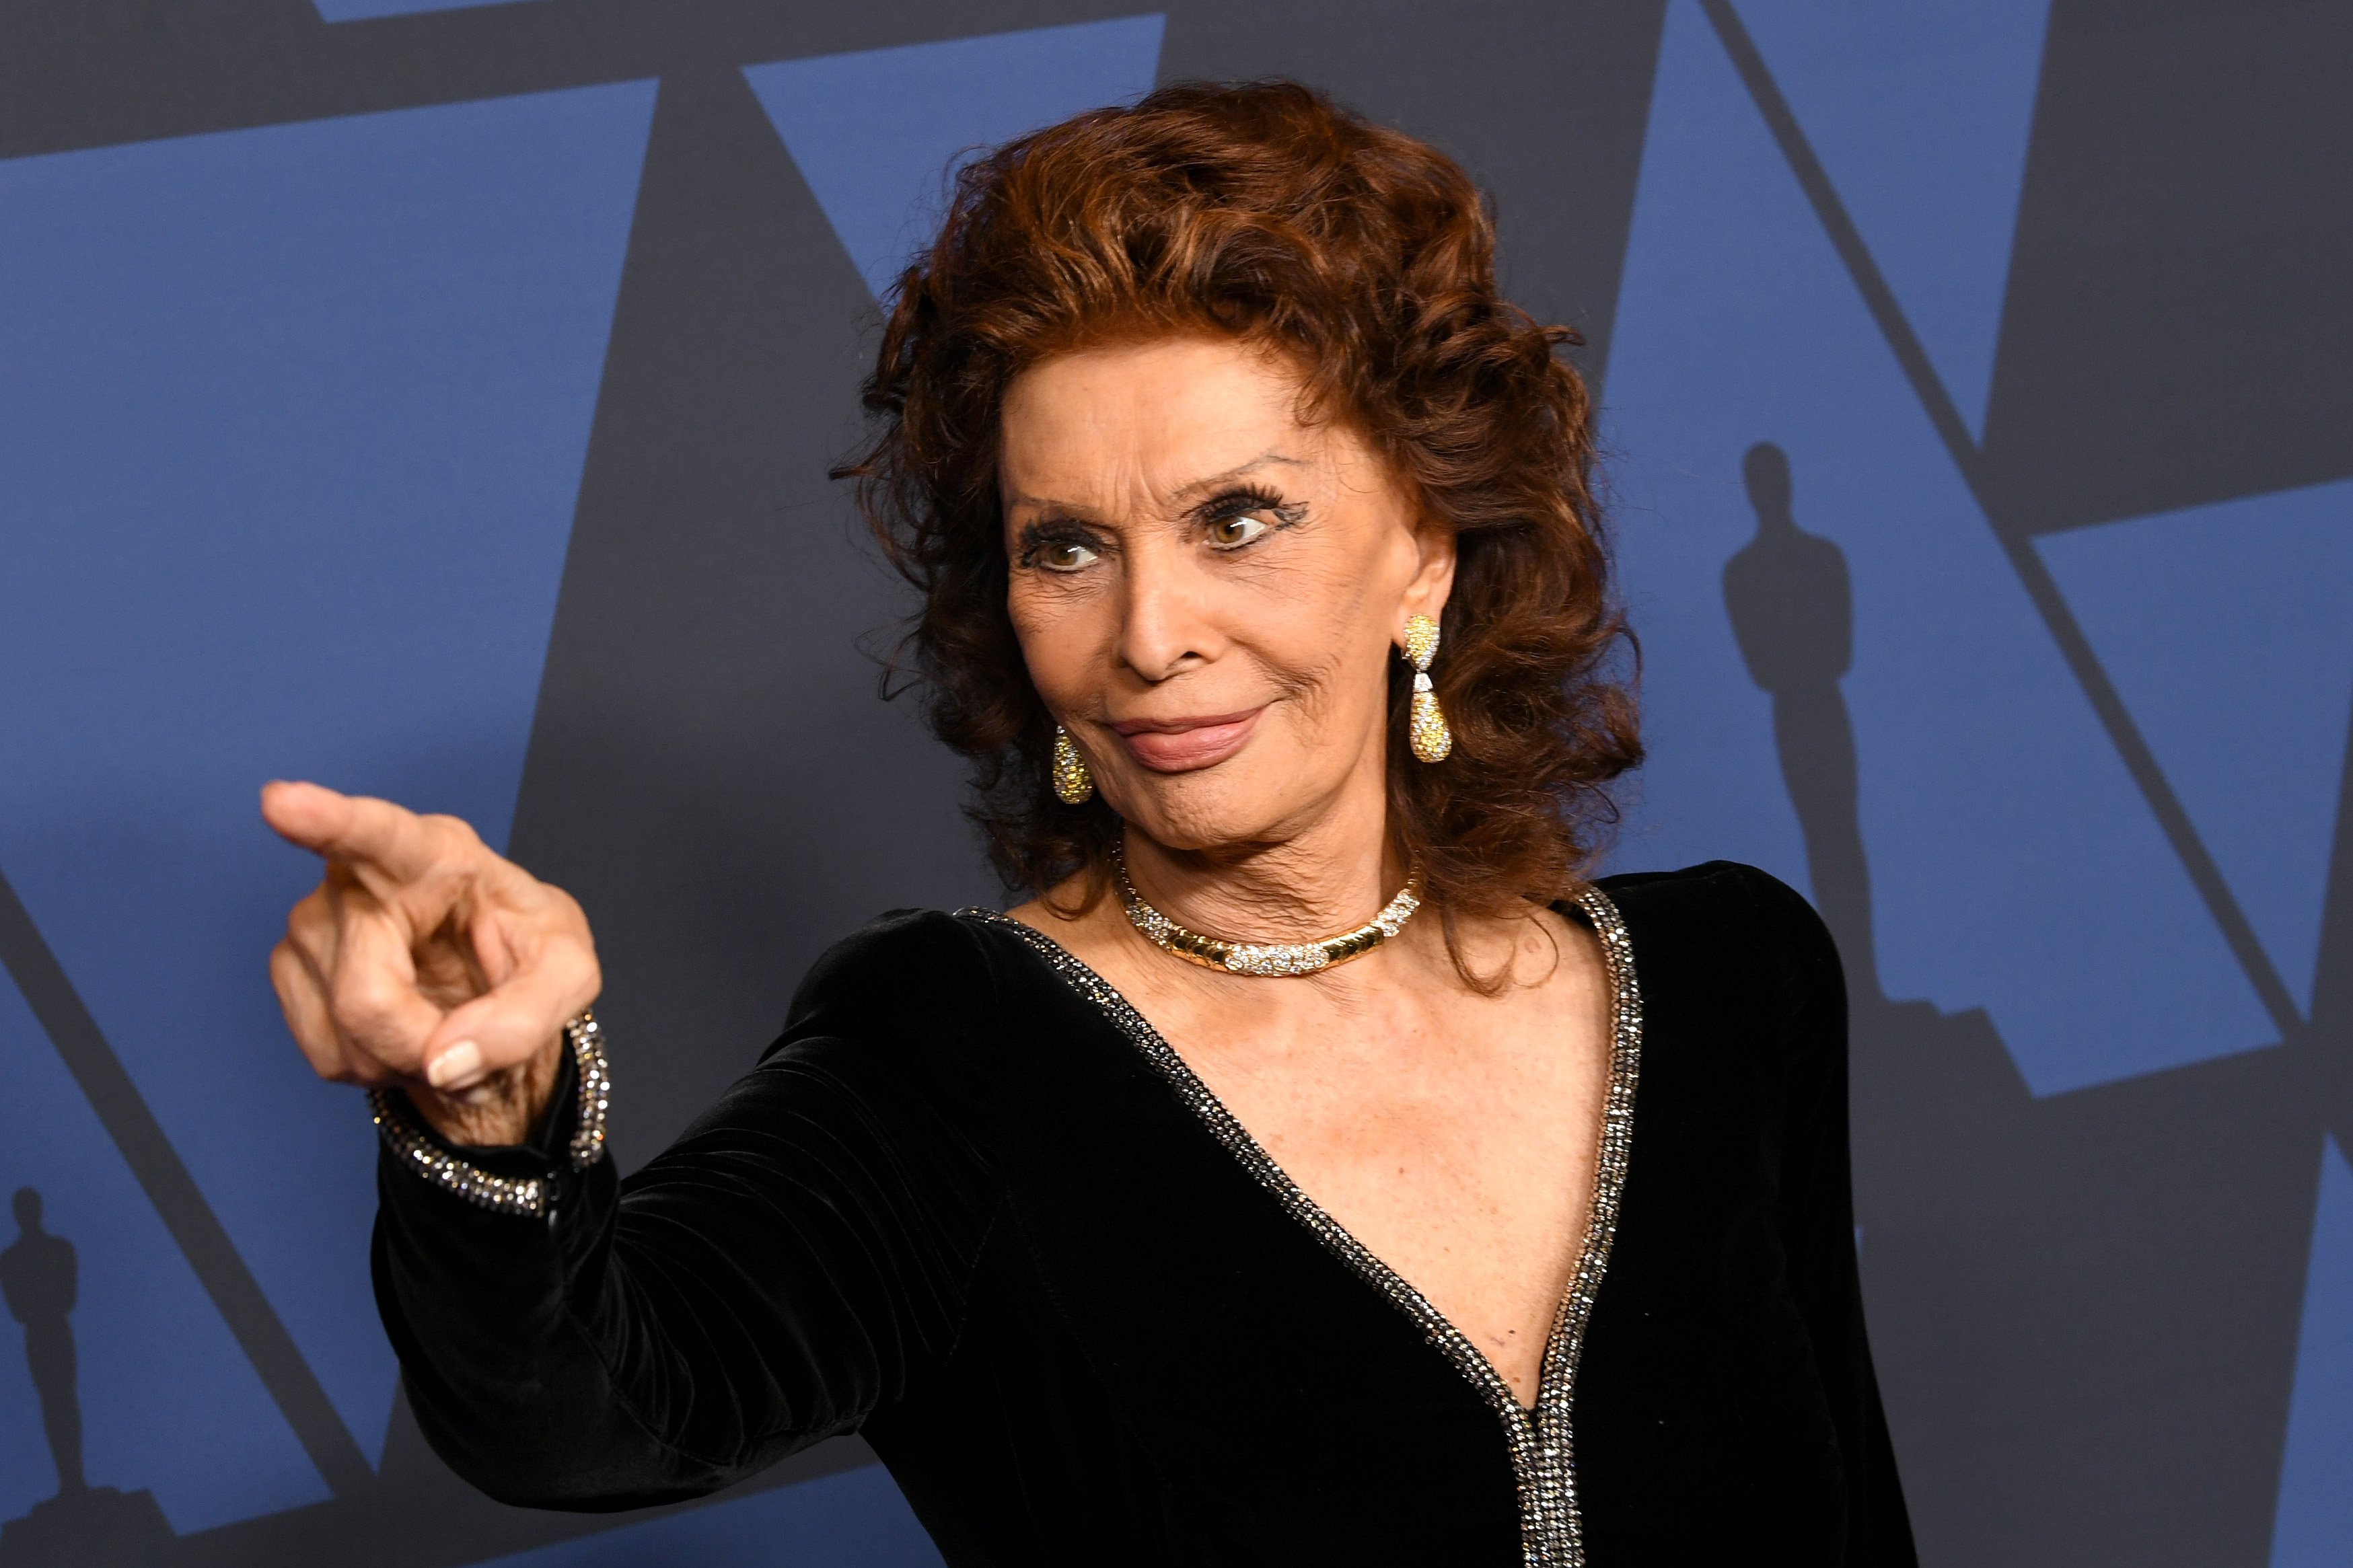 Sophia Loren nimmt am 27. Oktober 2019 in Hollywood, Kalifornien, an den 11. Annual Governors Awards der Academy of Motion Picture Arts and Sciences im Ray Dolby Ballroom im Hollywood & Highland Center teil. | Quelle: Getty Images